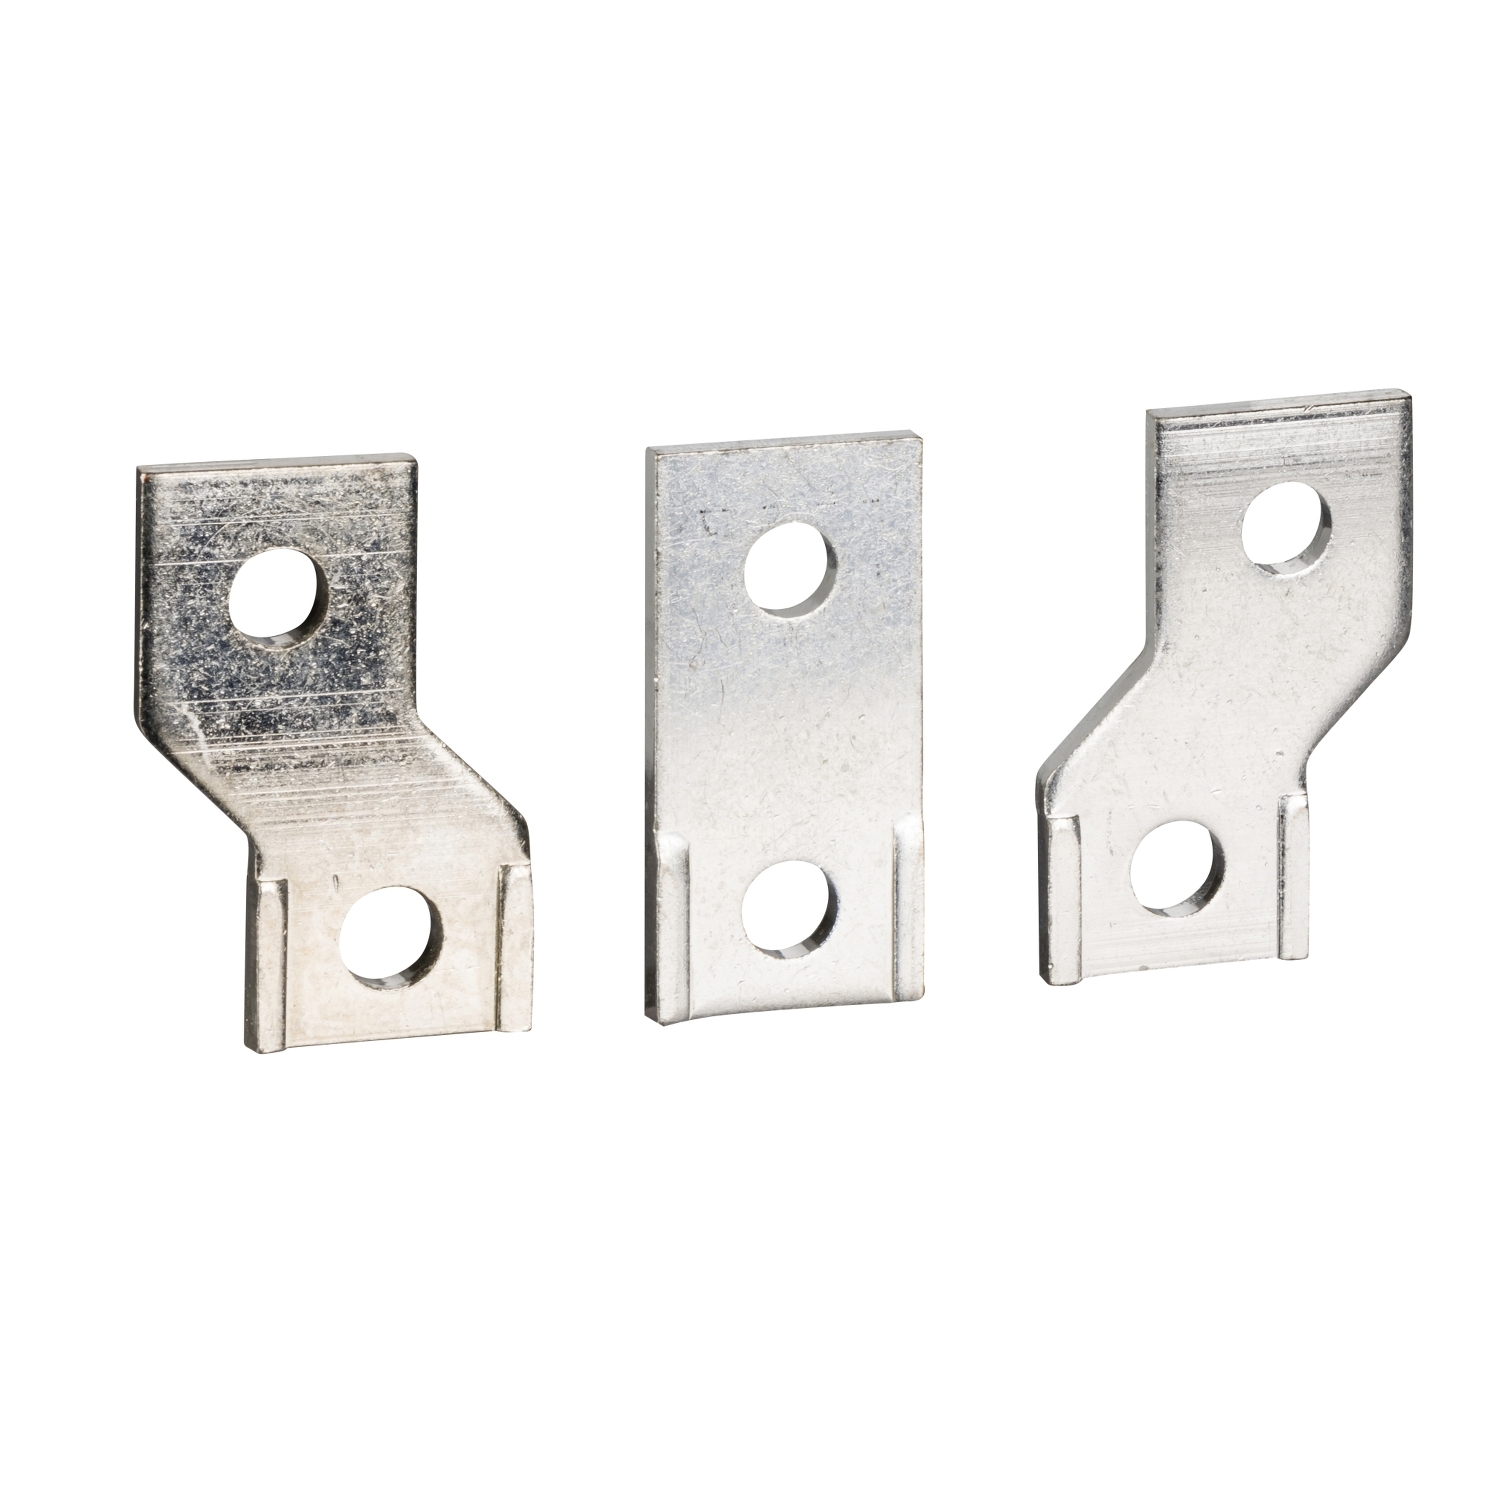 Terminal extensions, ComPacT NSX 100/160/250, spreaders 35mm to 45mm pitch, set of 3 parts